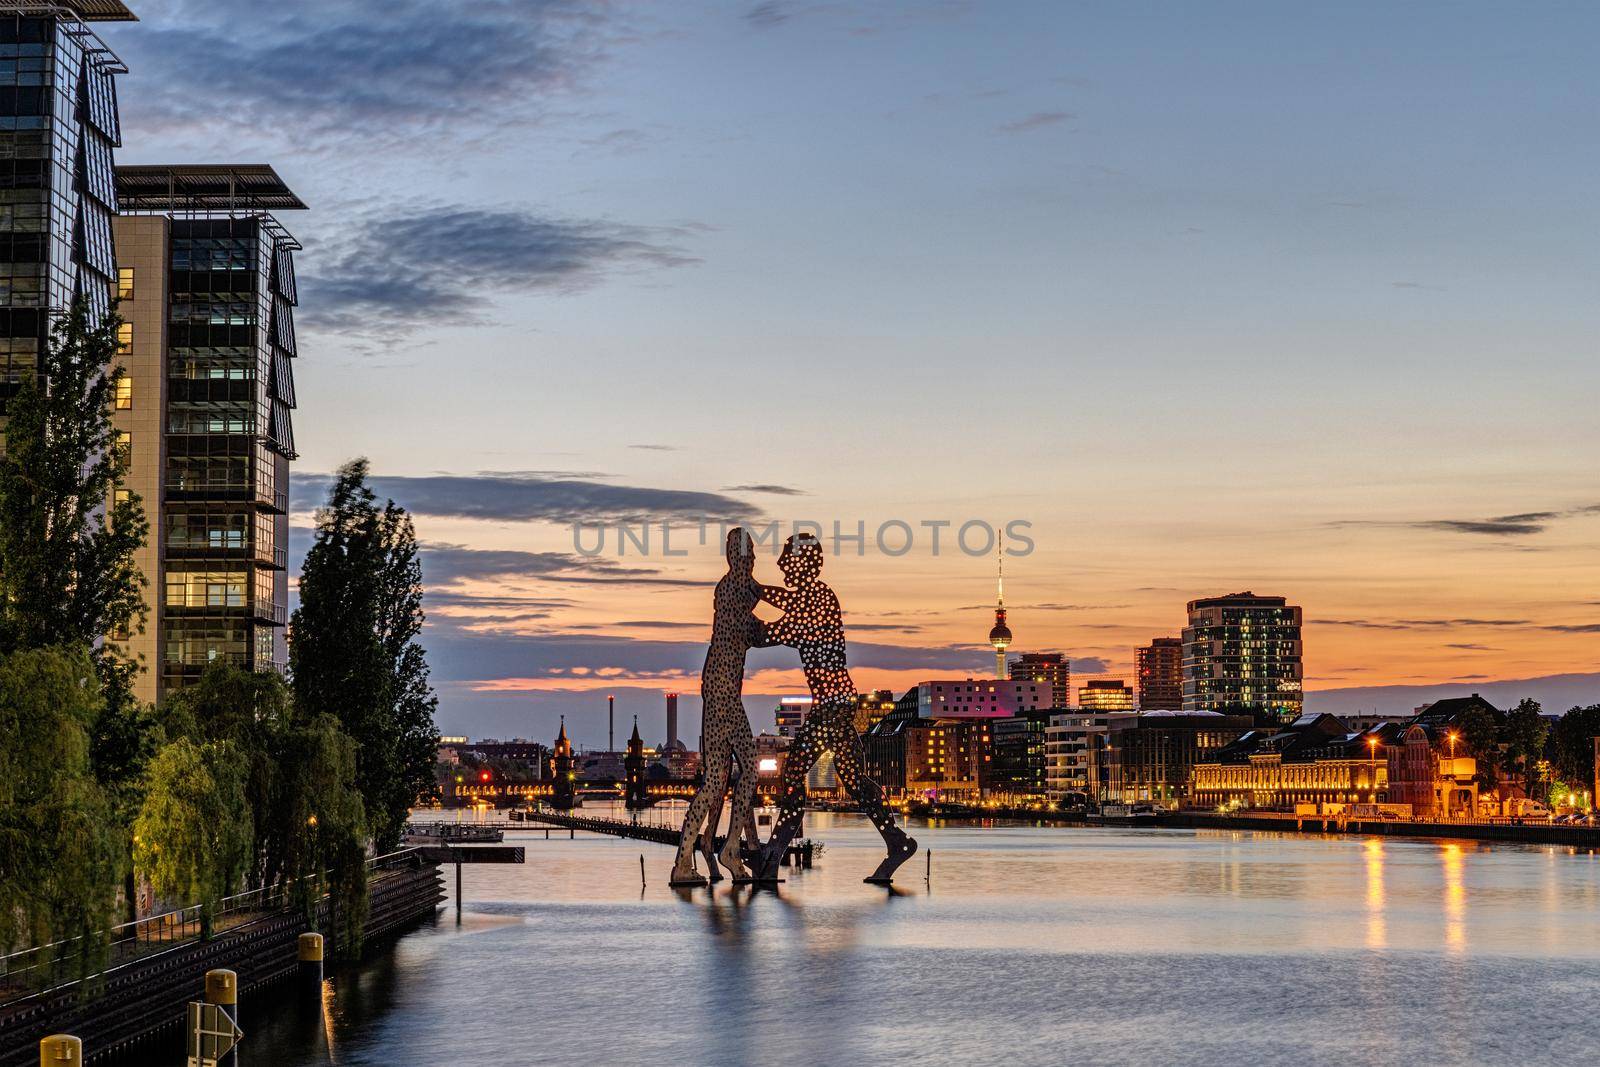 The river Spree in Berlin after sunset by elxeneize